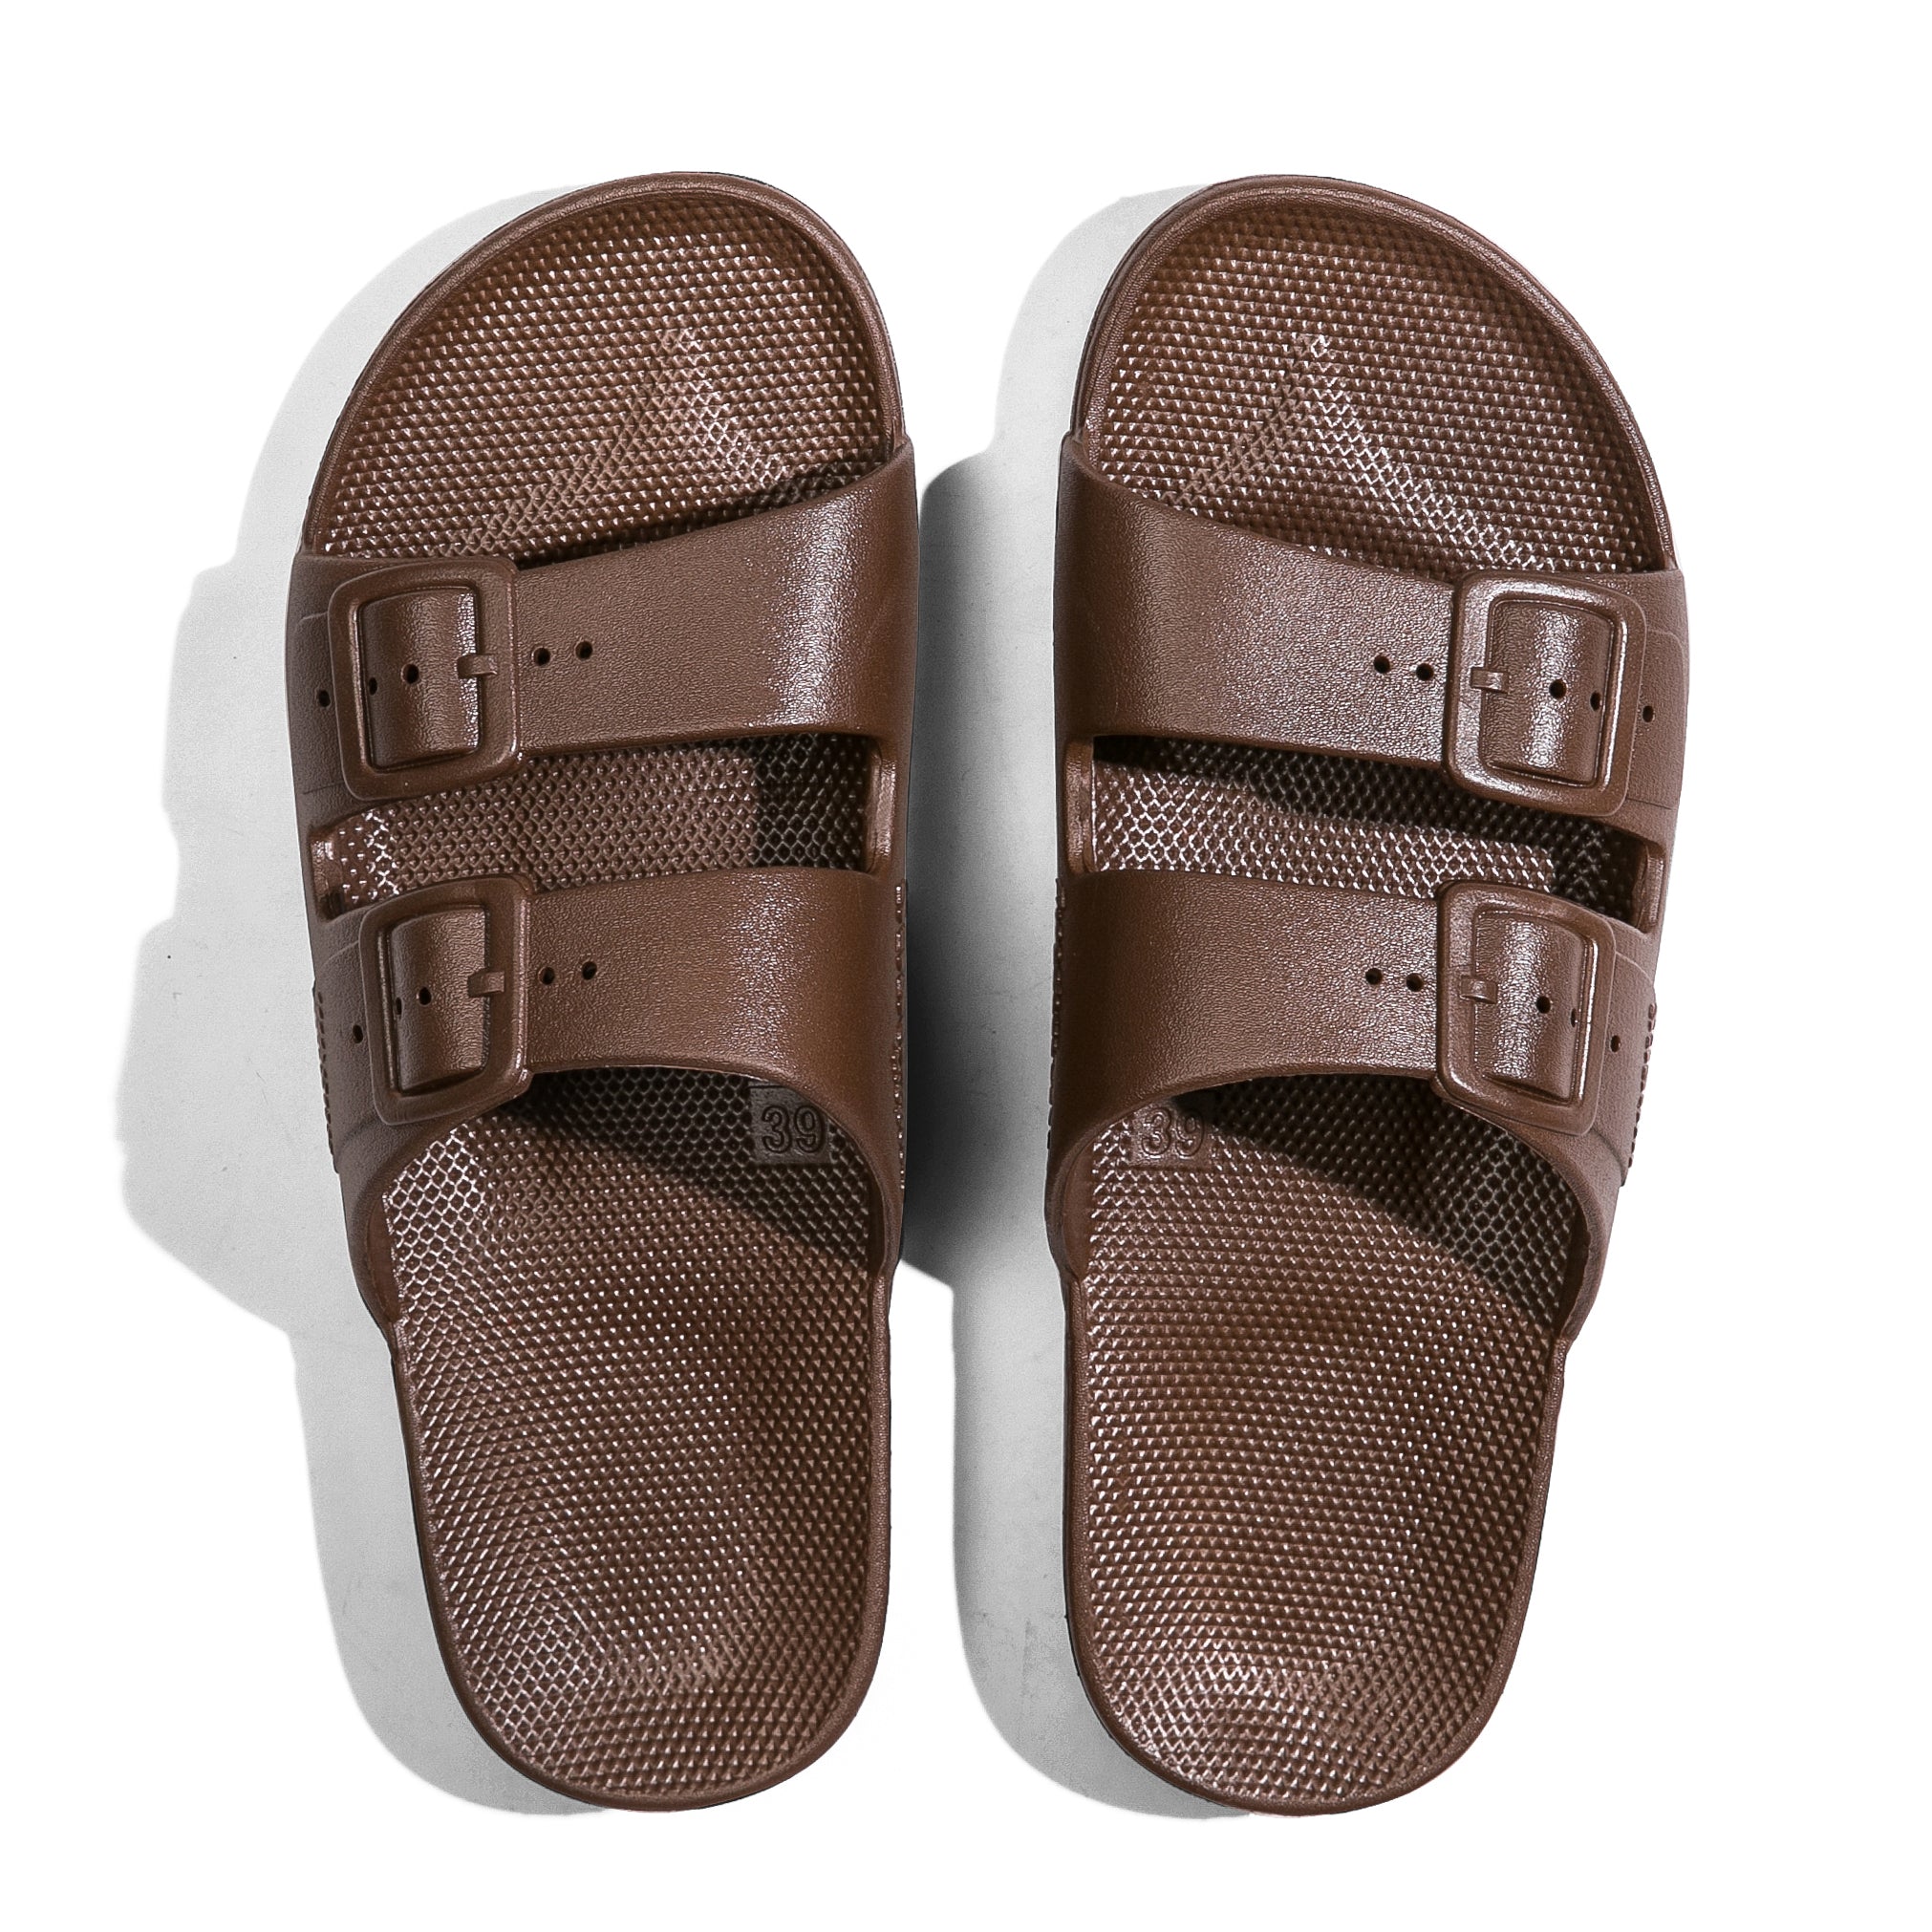 Freedom Moses Sandals Choco Moses | Zirkuss 